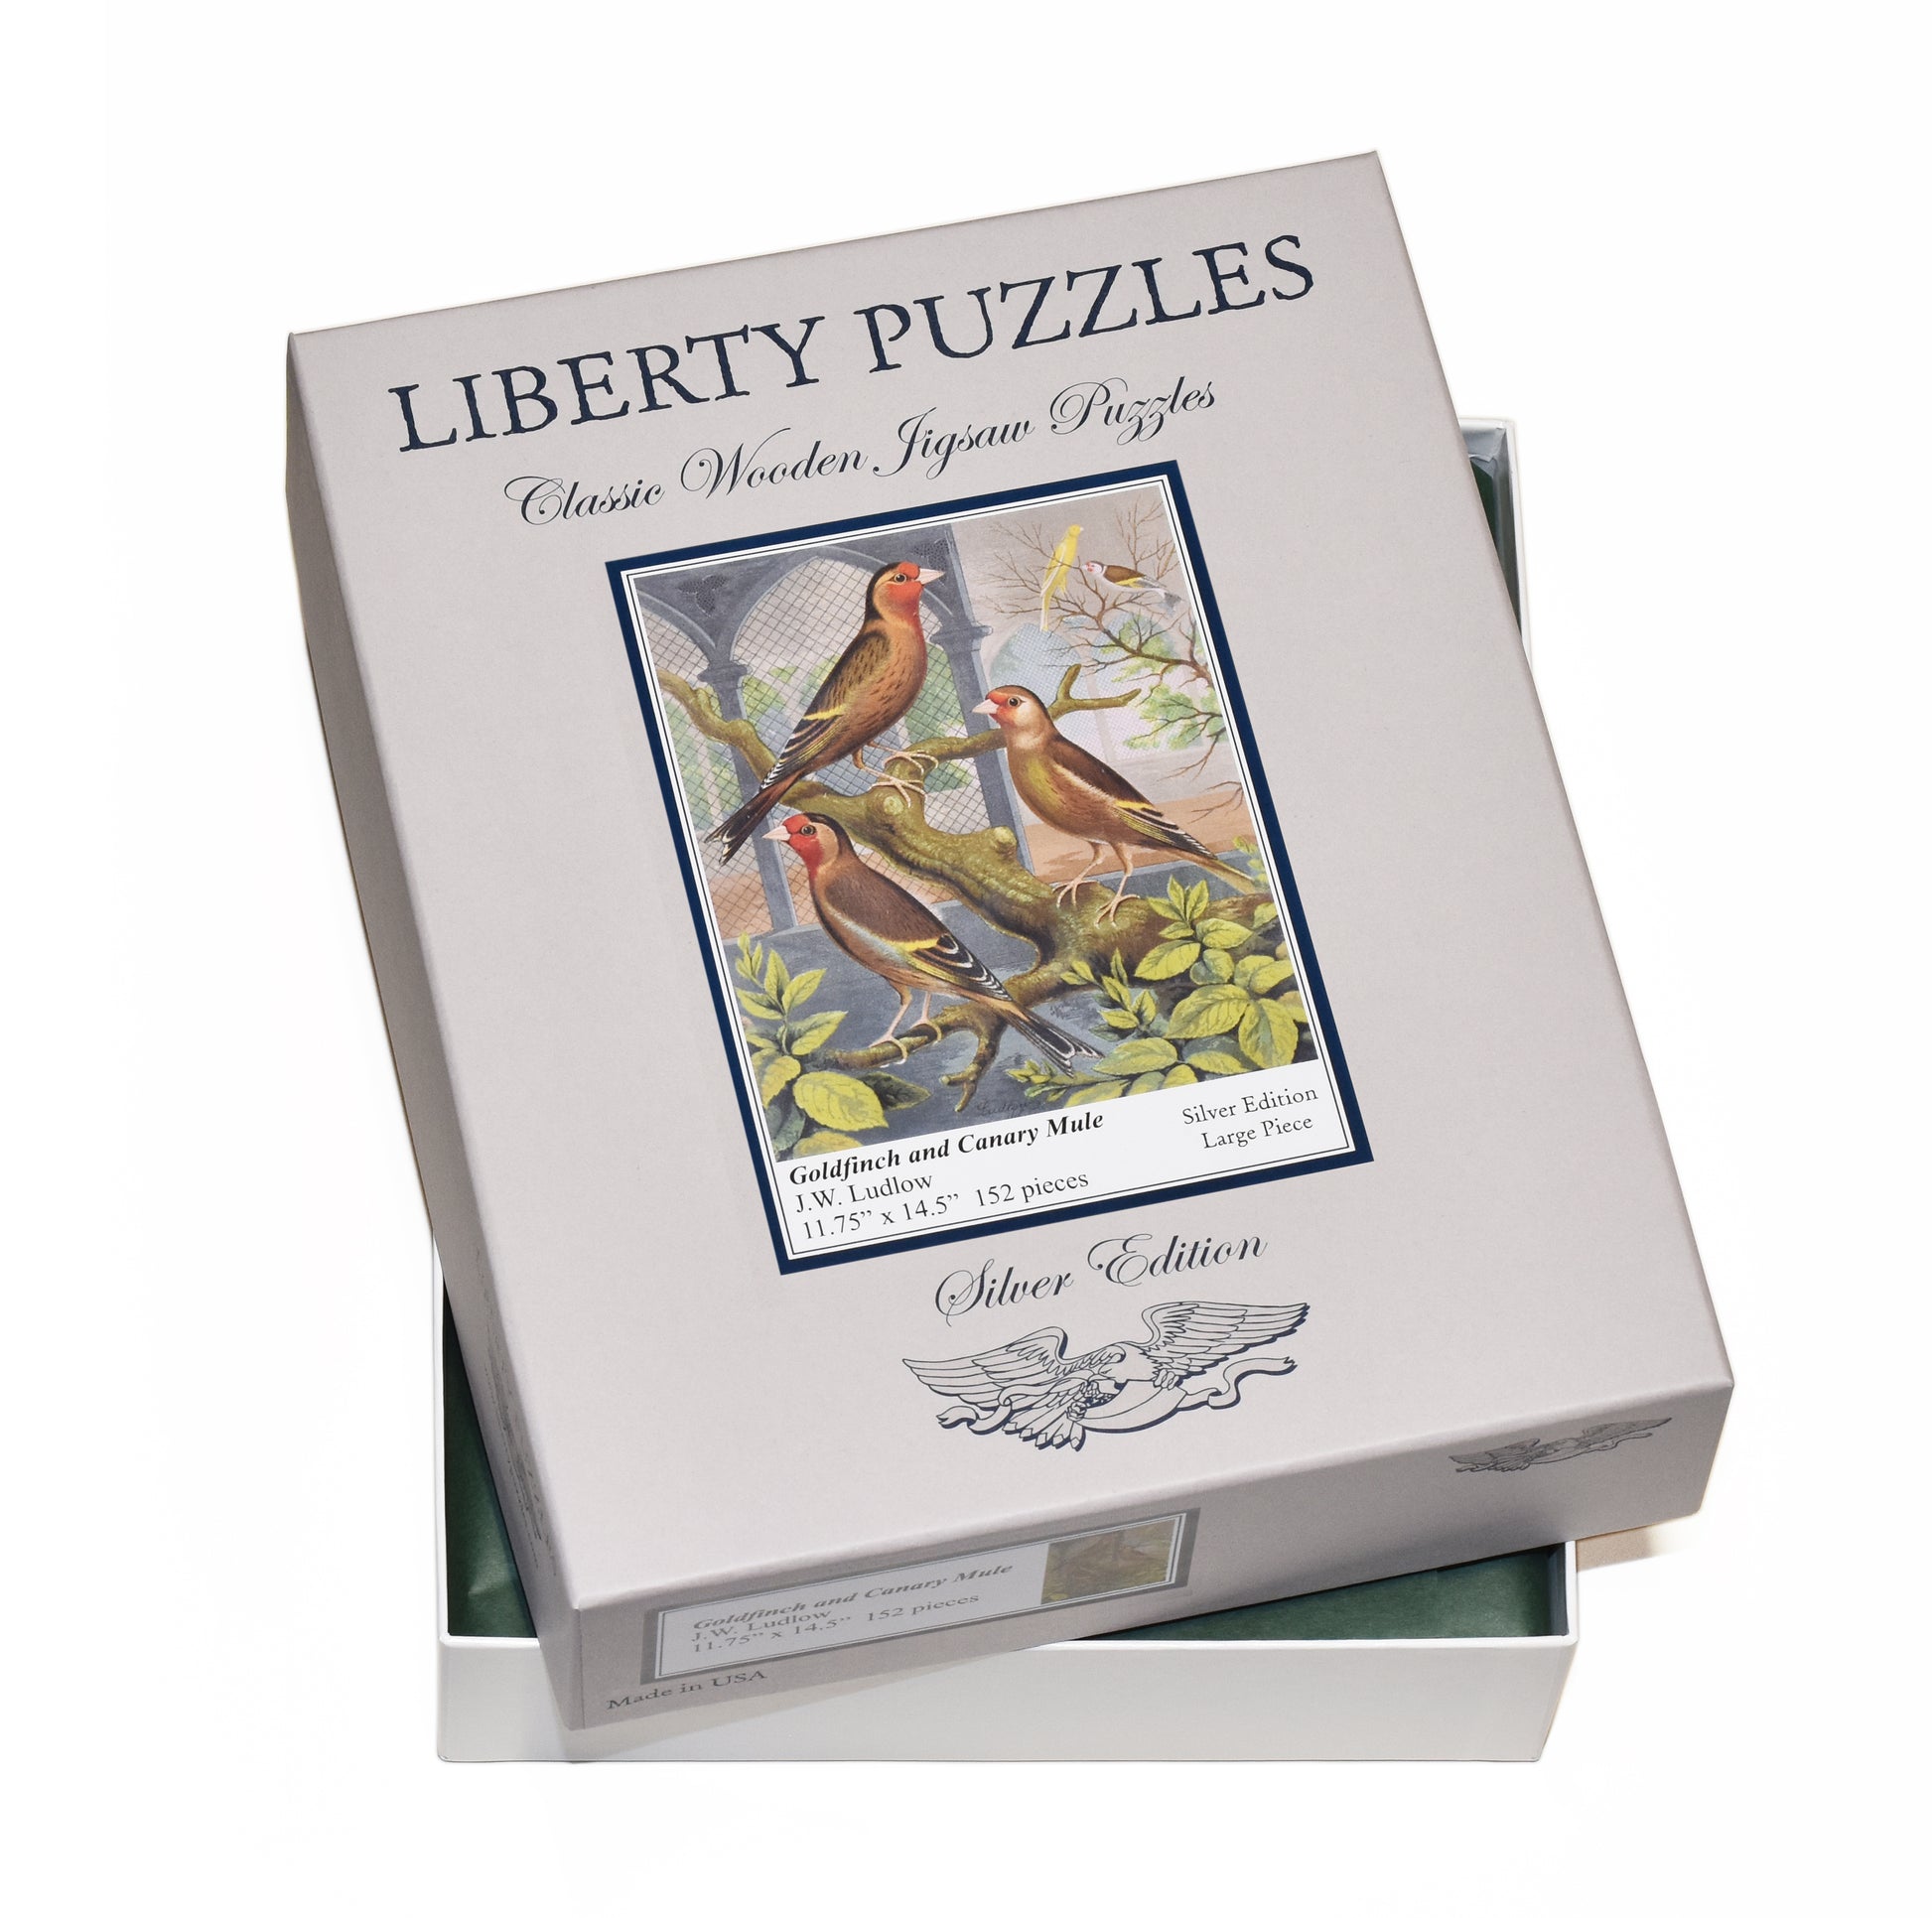 The box for the puzzle, Goldfinch and Canary Mule.